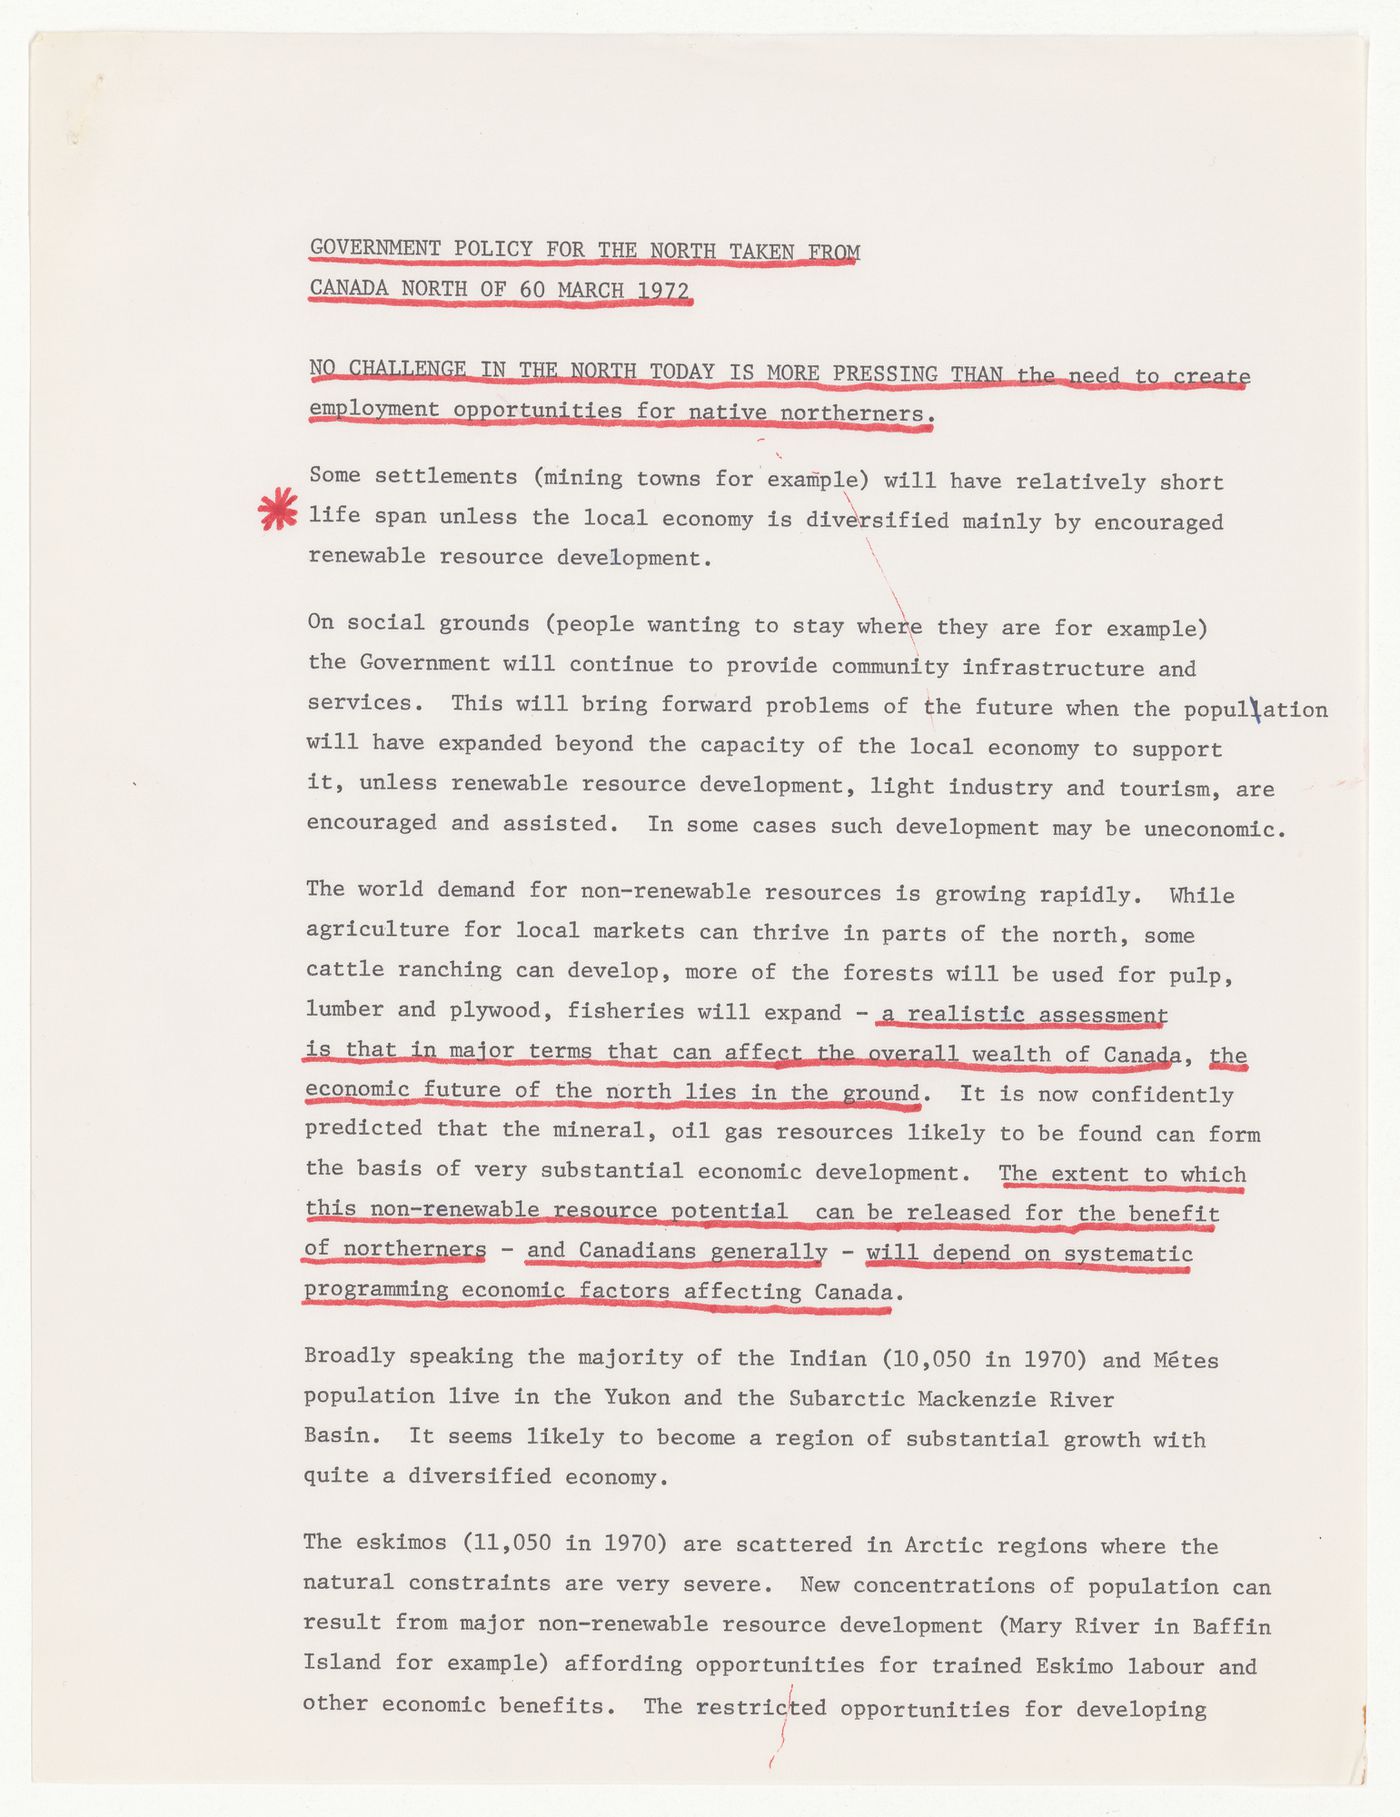 Canadian government policy for the North with annotations for Northern Airlift